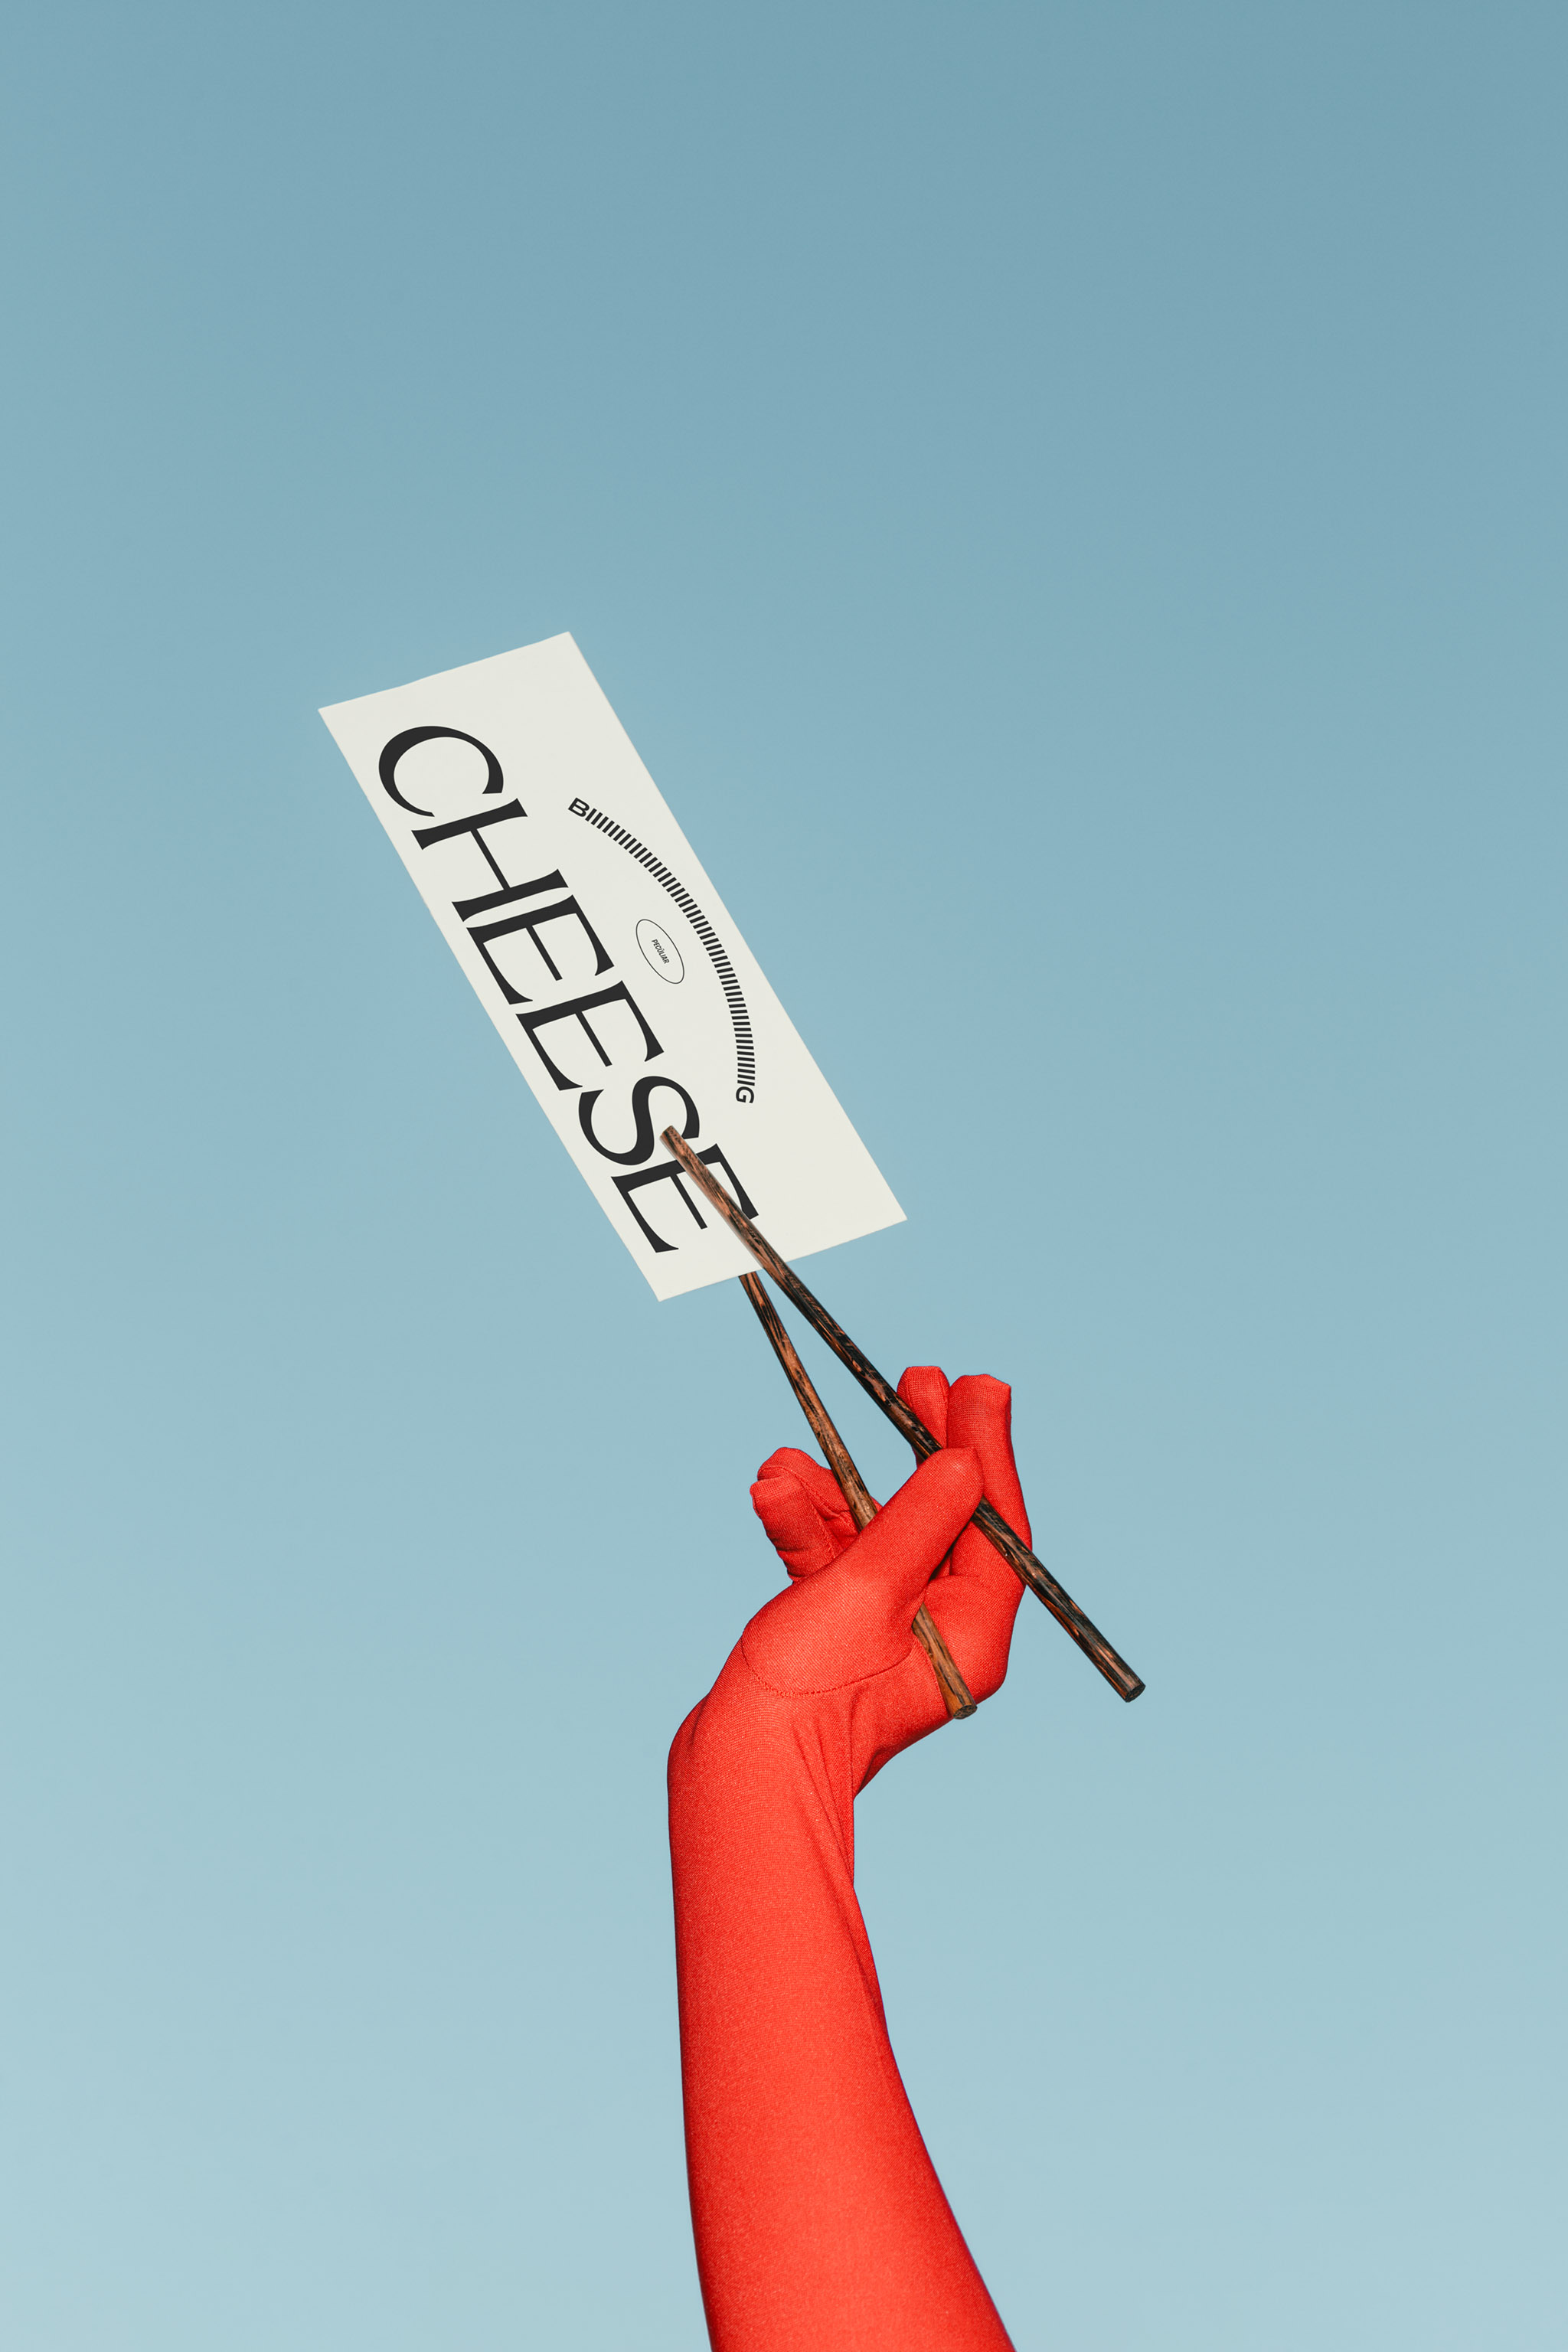 Photo of a red gloved hand, set against a light pastel blue sky, holding up a vertical paper menu with black typography with dark wooden chopsticks, in use example.